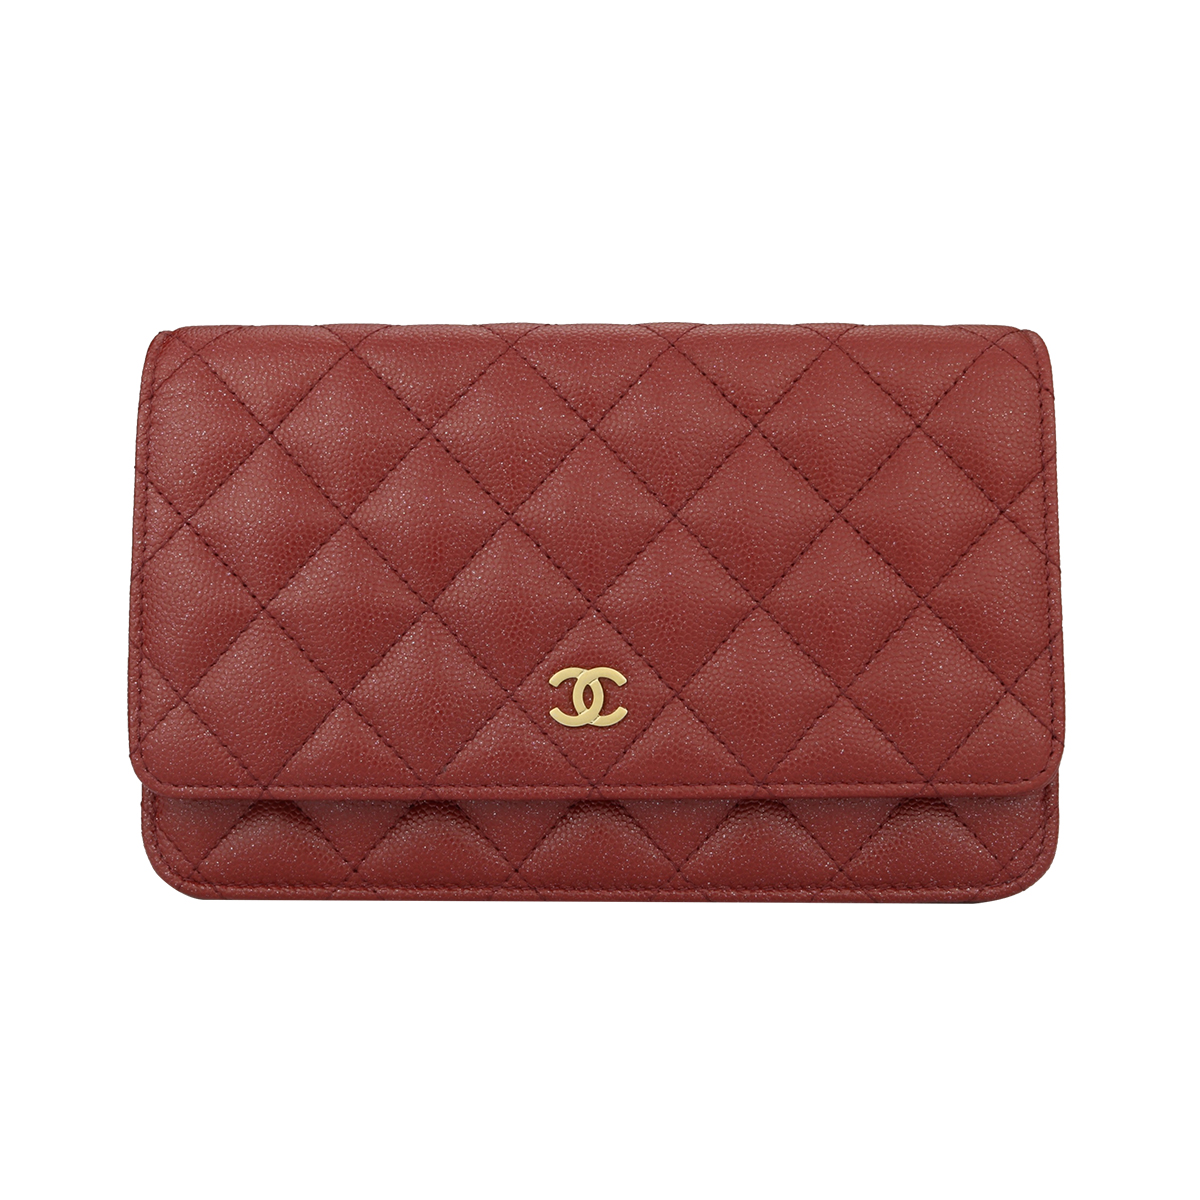 CHANEL Wallet On Chain Burgundy Iridescent Caviar Gold Hardware 2018 -  BoutiQi Bags